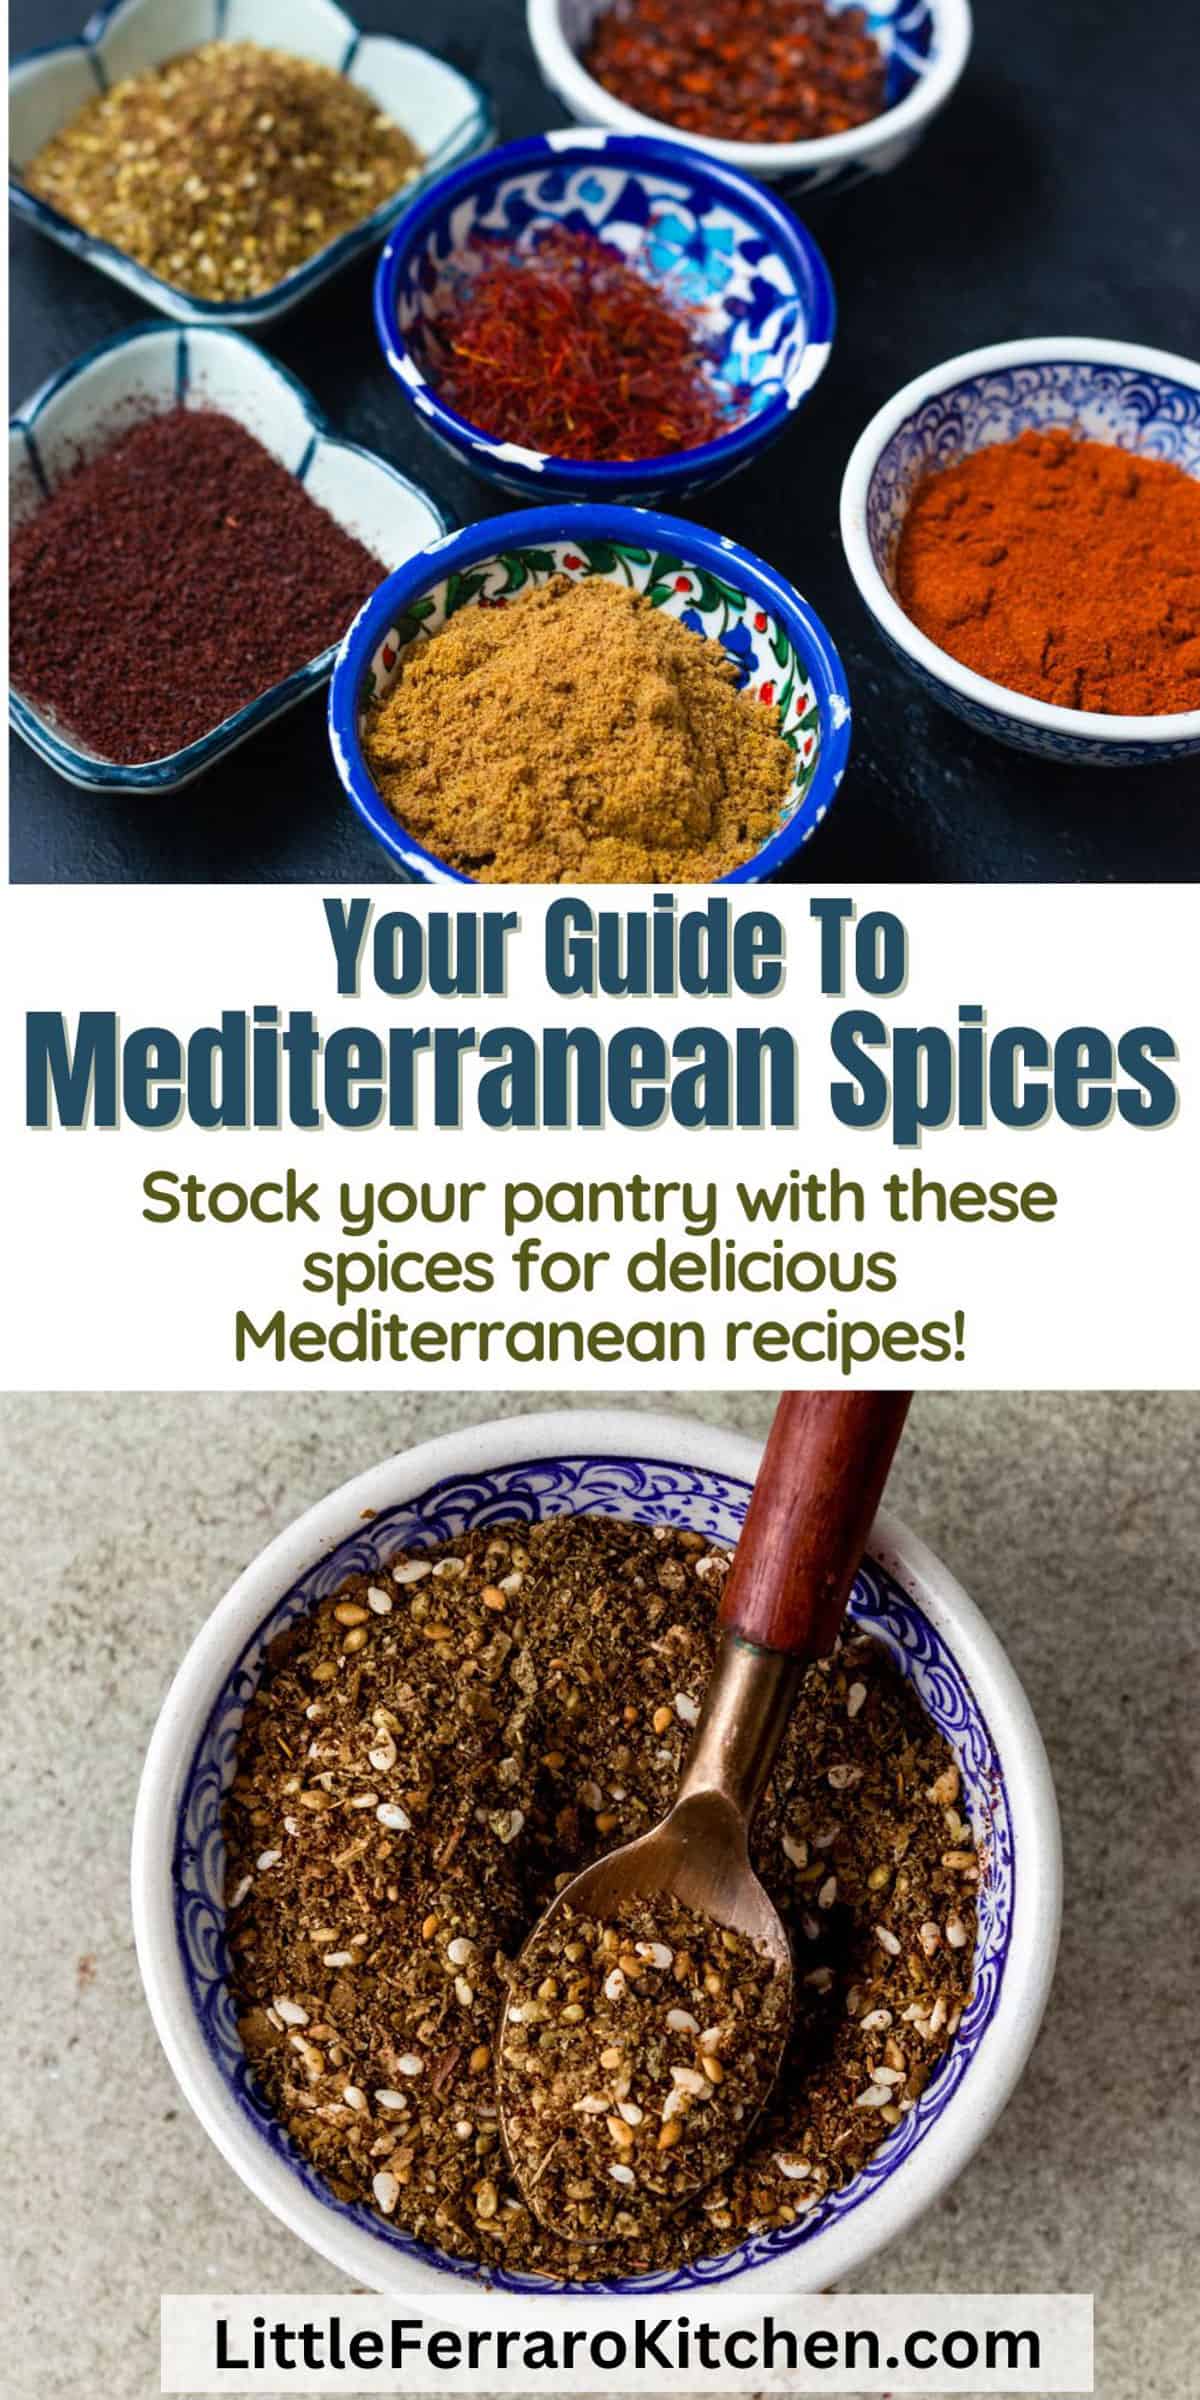 A beginners guide to Mediterranean spices including turmeric, paprika, za'atar and more.